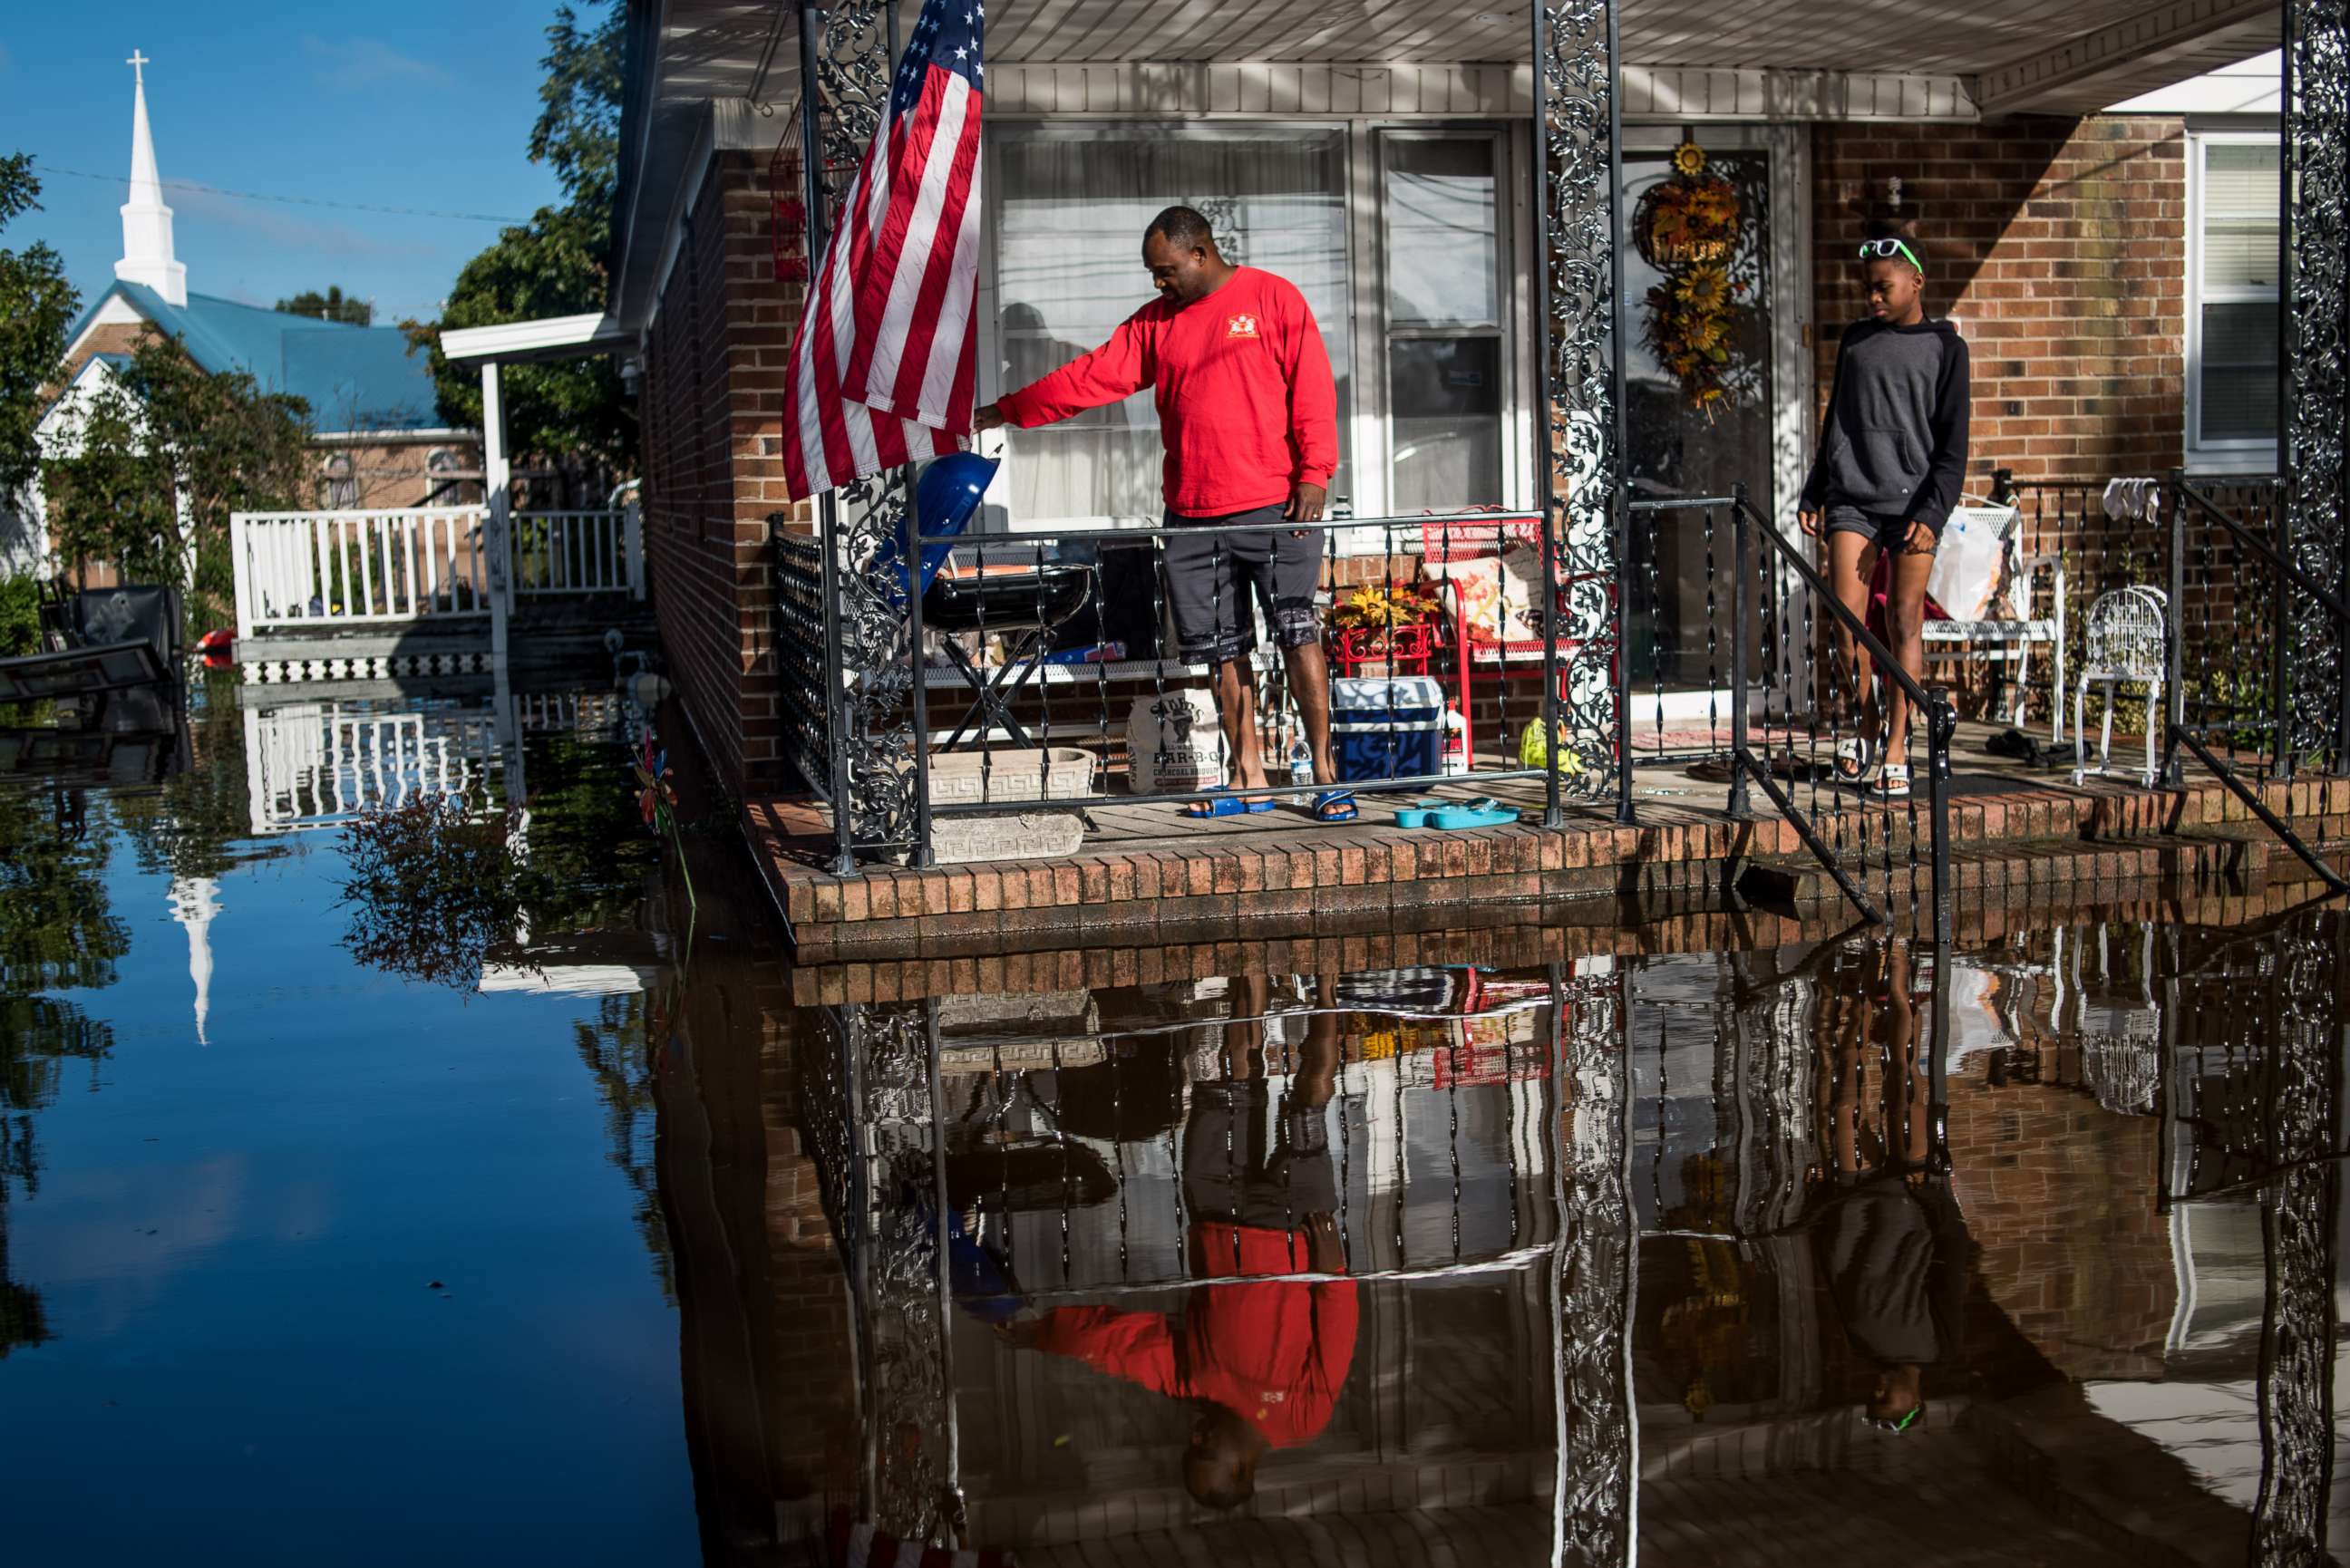 PHOTO: Robert Addison cooks breakfast on a charcoal grill with his son, Artis Addison, on Oct. 12, 2016 in a home surrounded by floodwater after Hurricane Matthew in Lumberton, N.C.